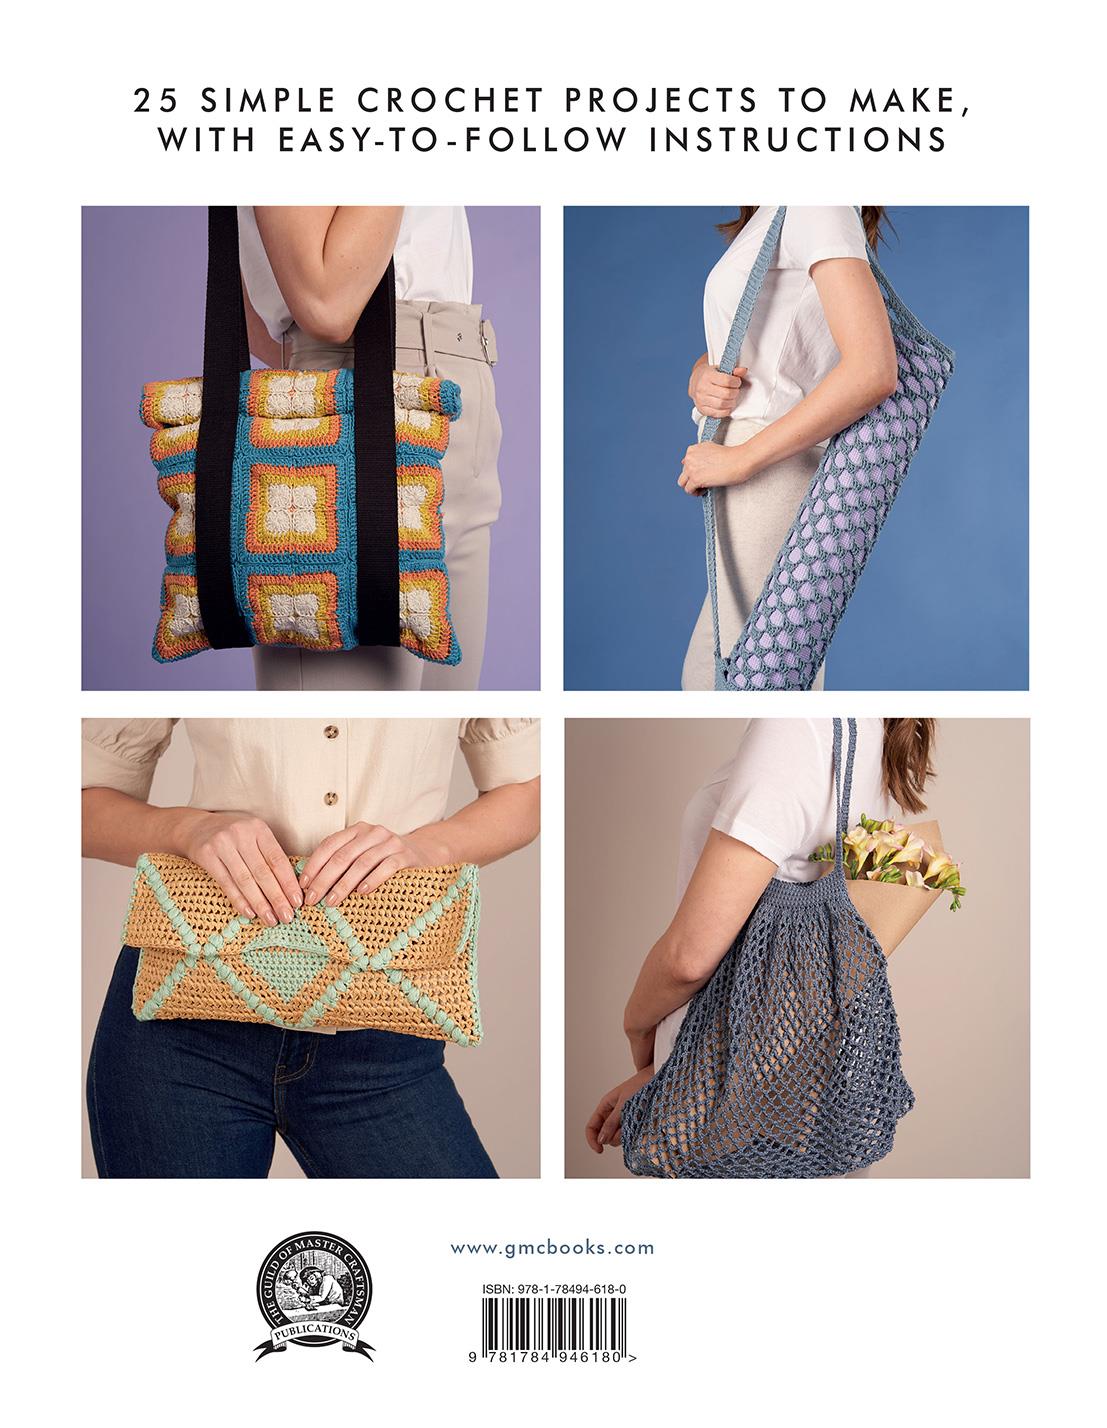 Weekend Makes Crocheted Bags - Pattern Book by Emma Osmond